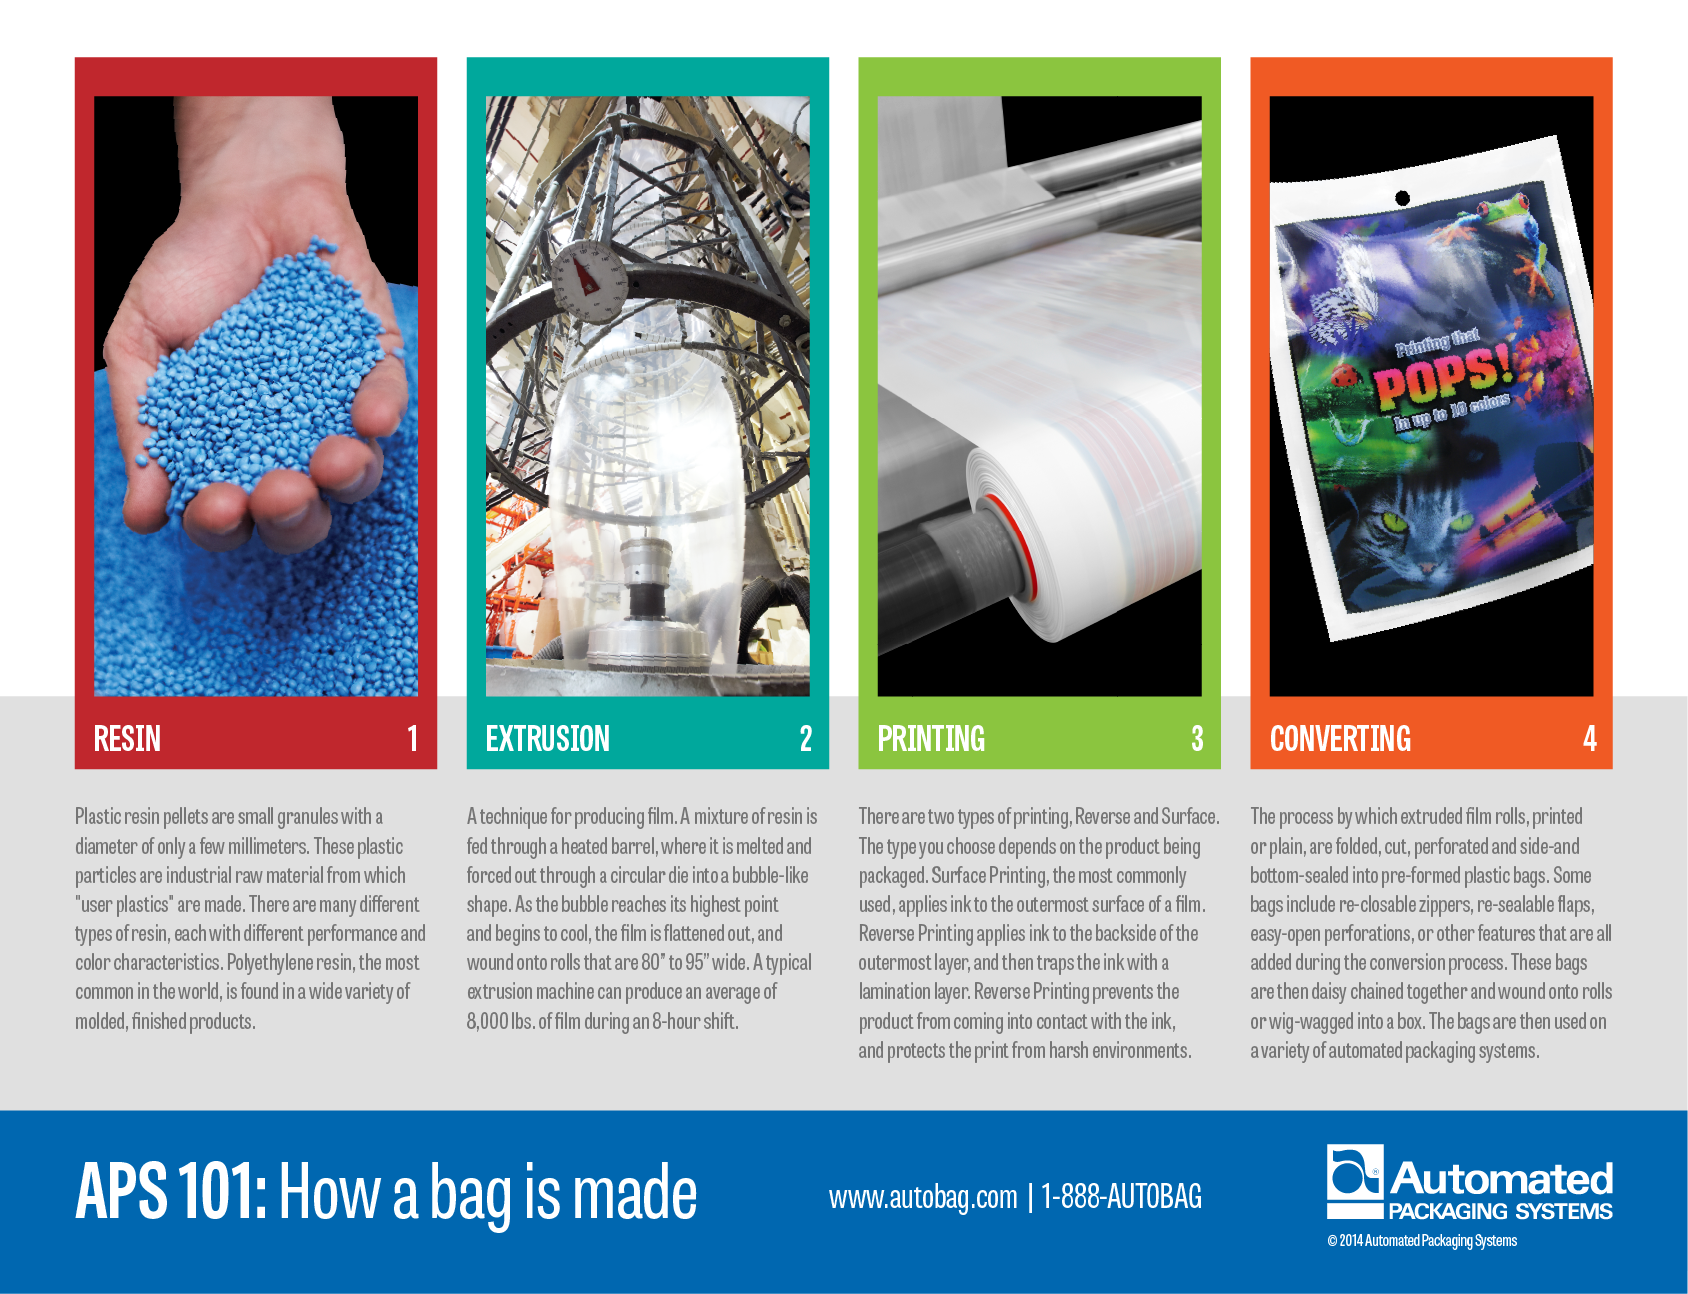 Breaking Down the Bag: How a bag is made infographic